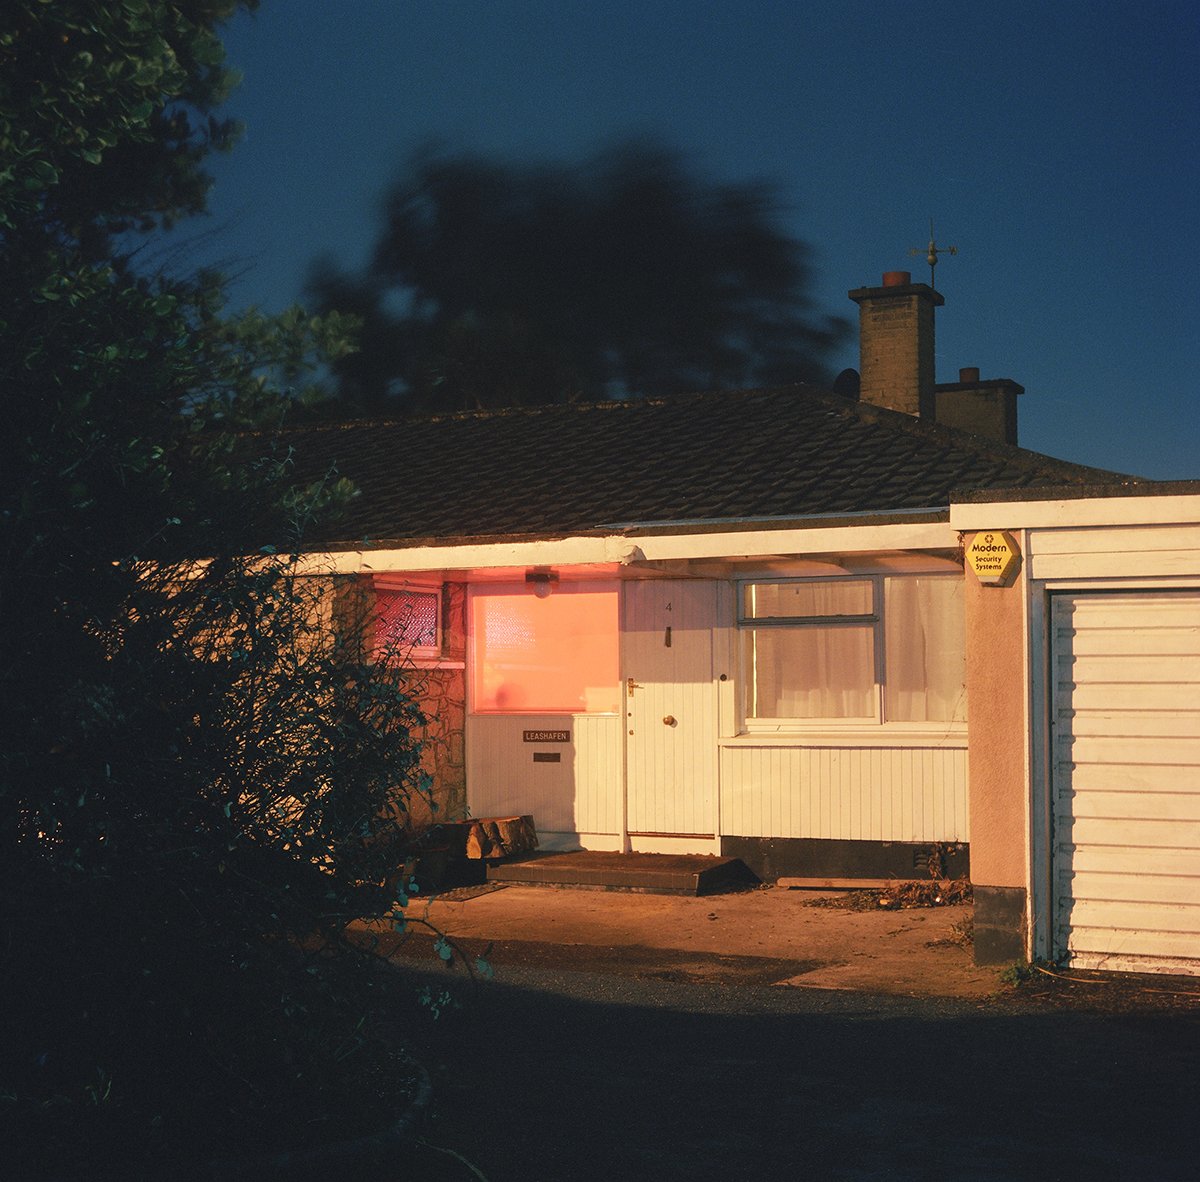 'Leashafen' from the series 'Church Road' © Emma McGuire